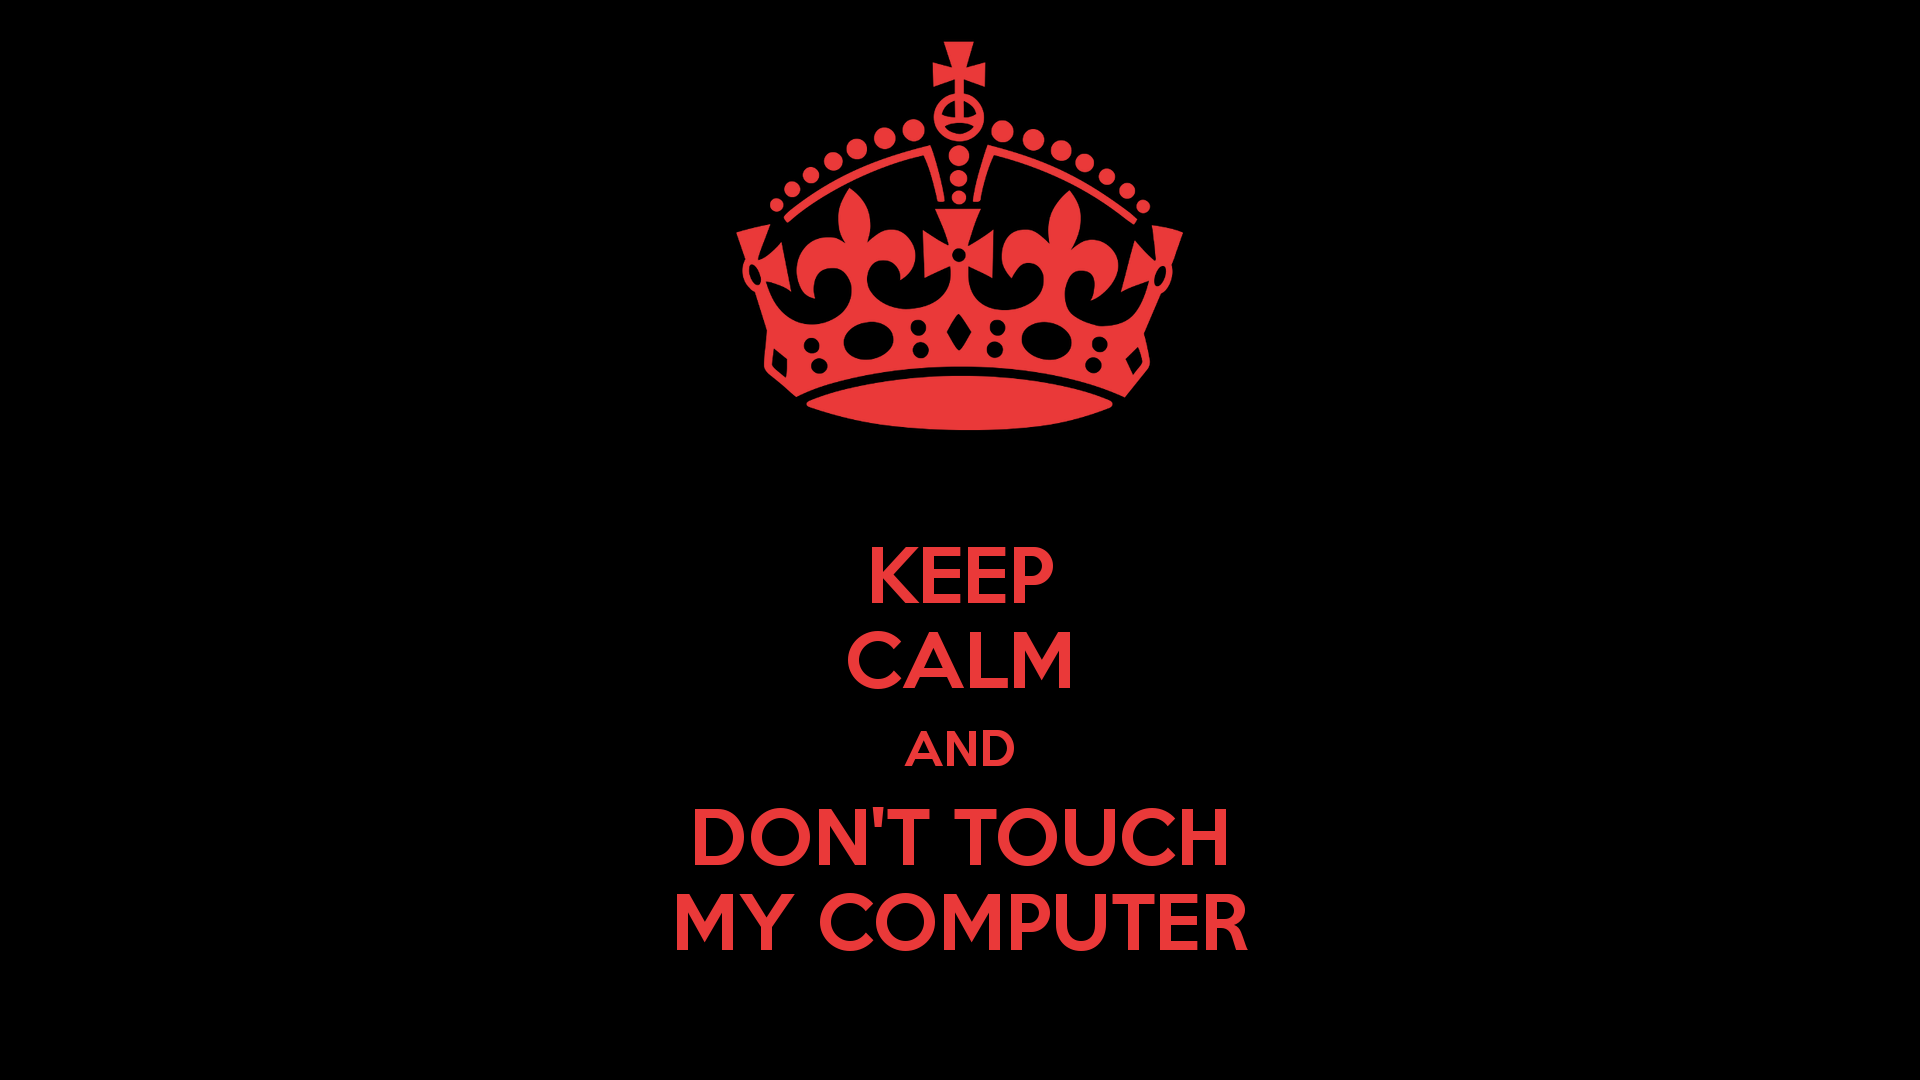 Dont touch my computer wallpaper